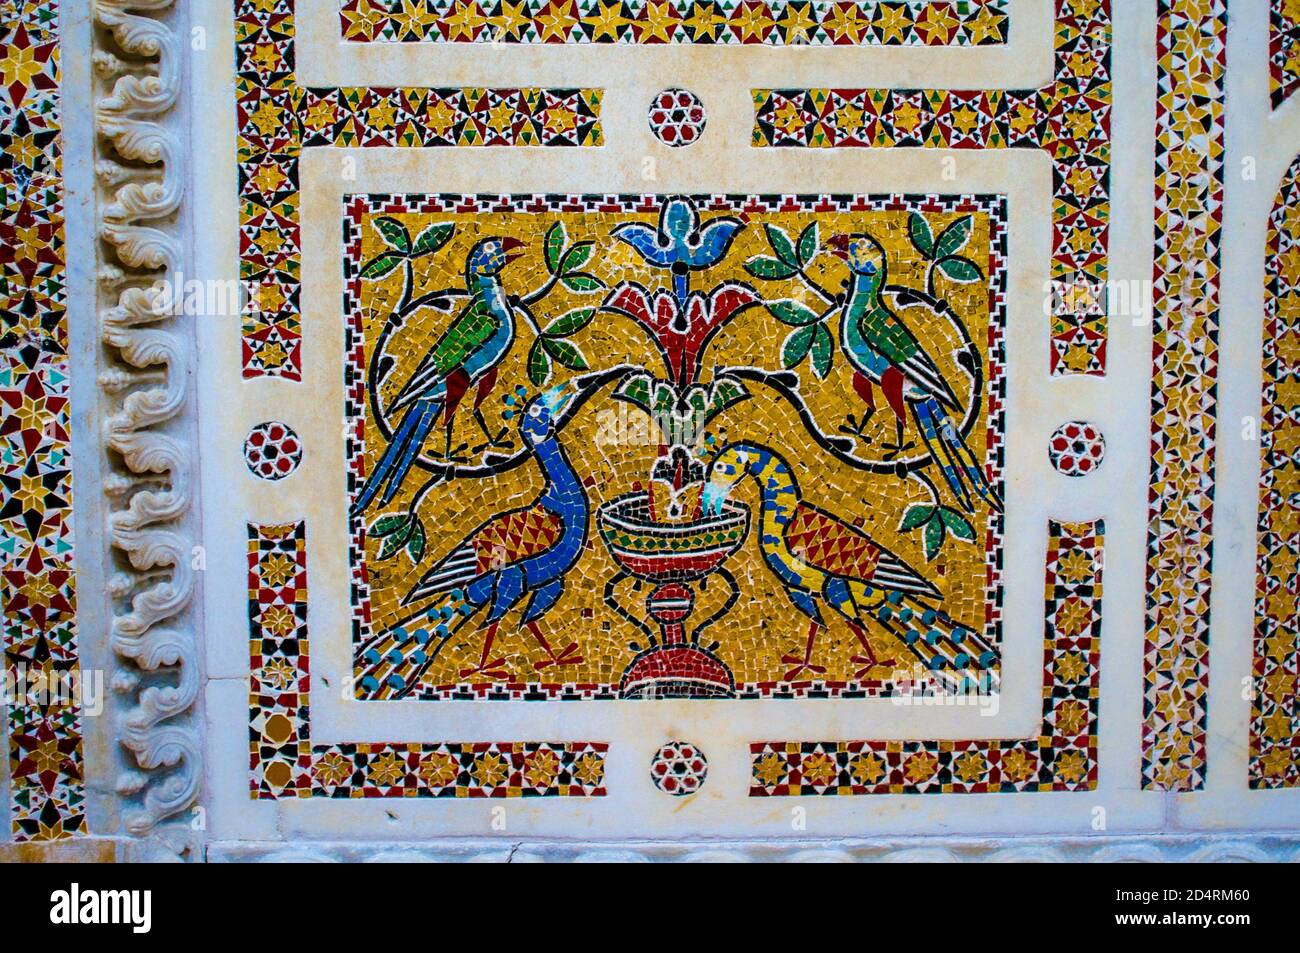 Brightly colored mosaic featuring exotic birds and fountain, on the Ambo of the Epistles (early reading stand) in the Duomo di Ravello, Amalfi Coast. Stock Photo